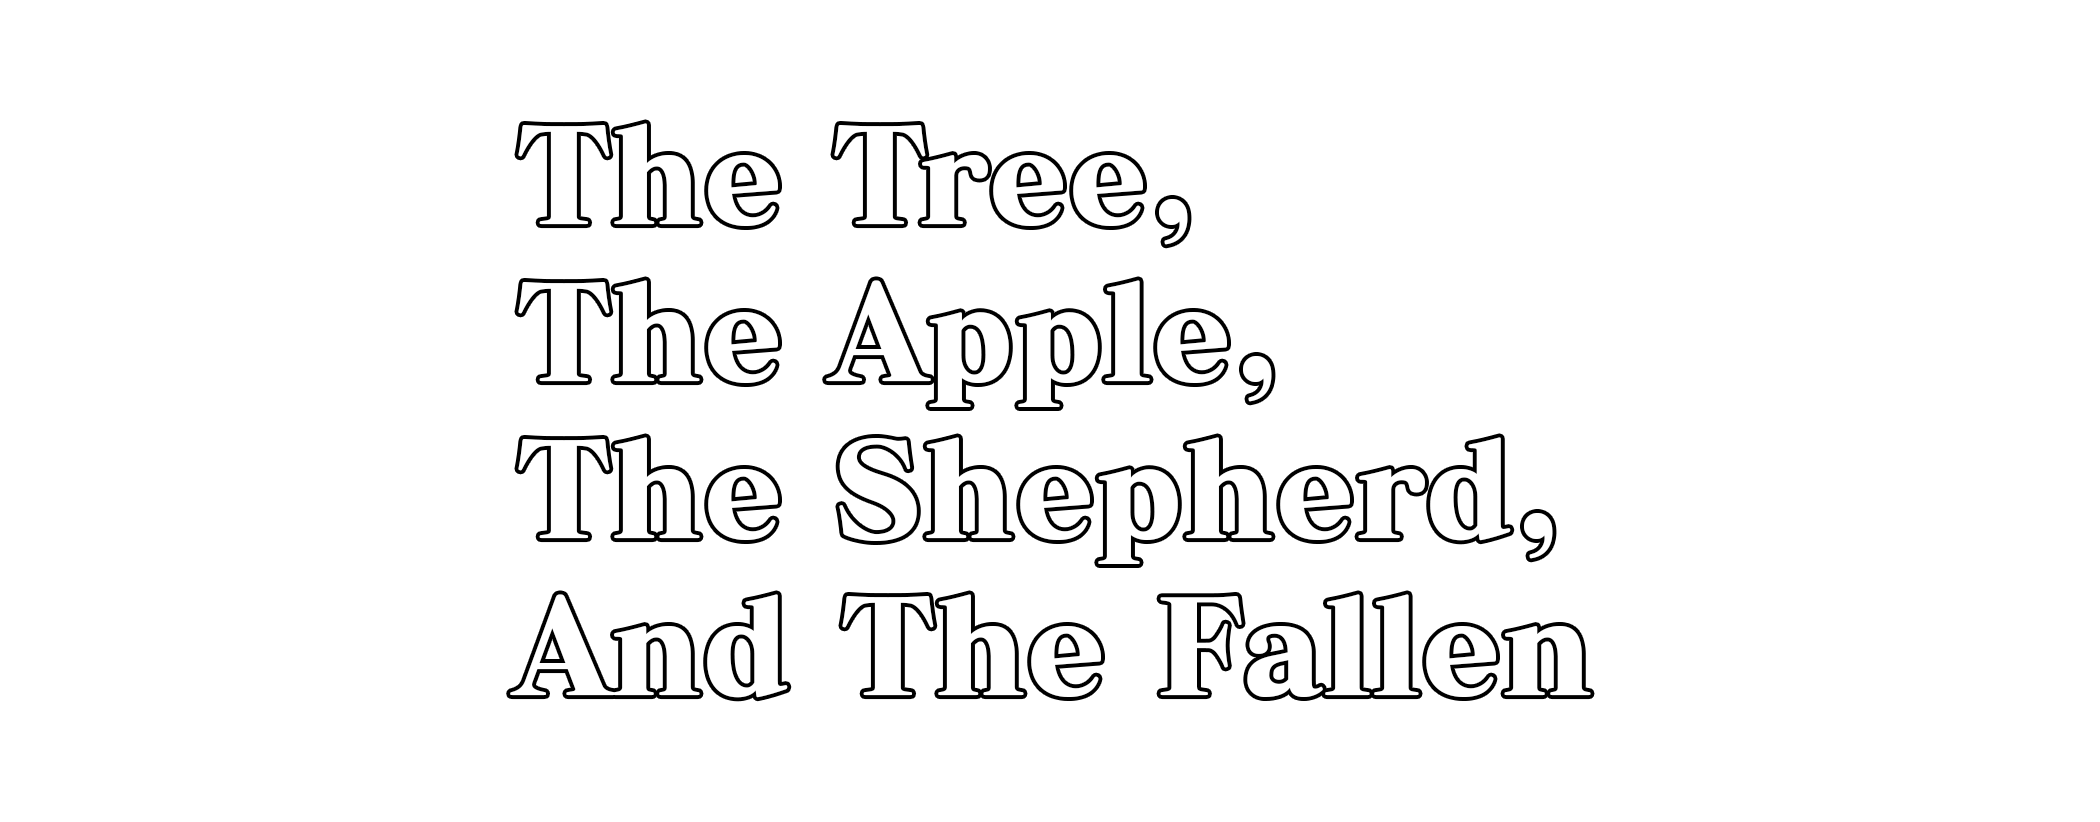 The Tree, The Apple, The Shepherd, And The Fallen